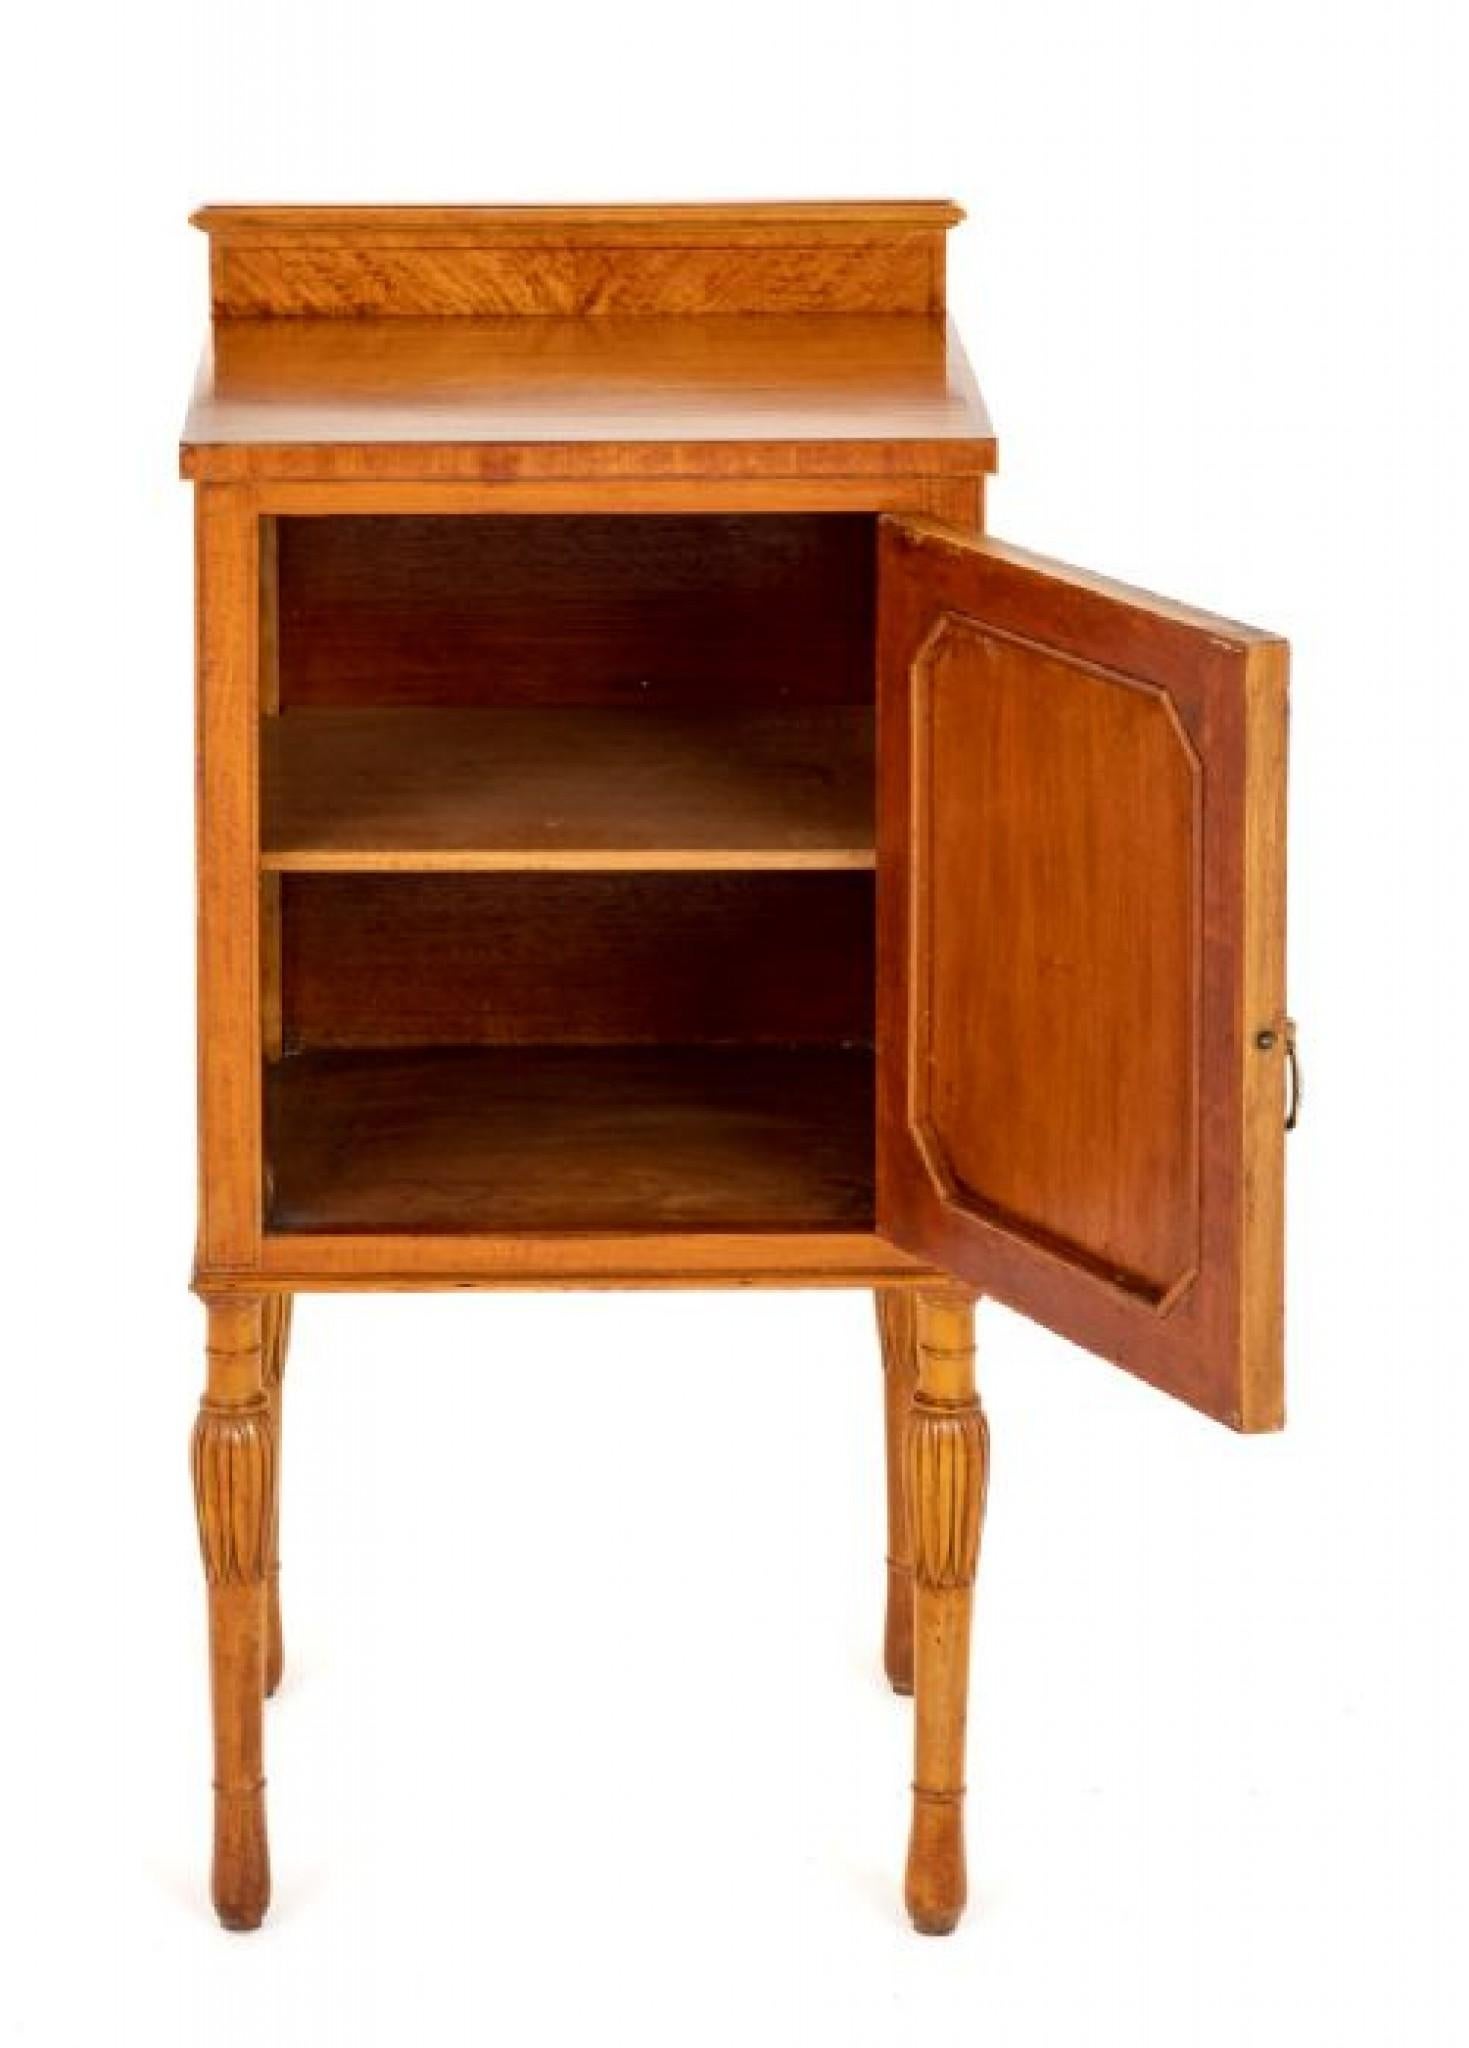 Early 20th Century Victorian Bedside Chest Satinwood Nightstand, 1900